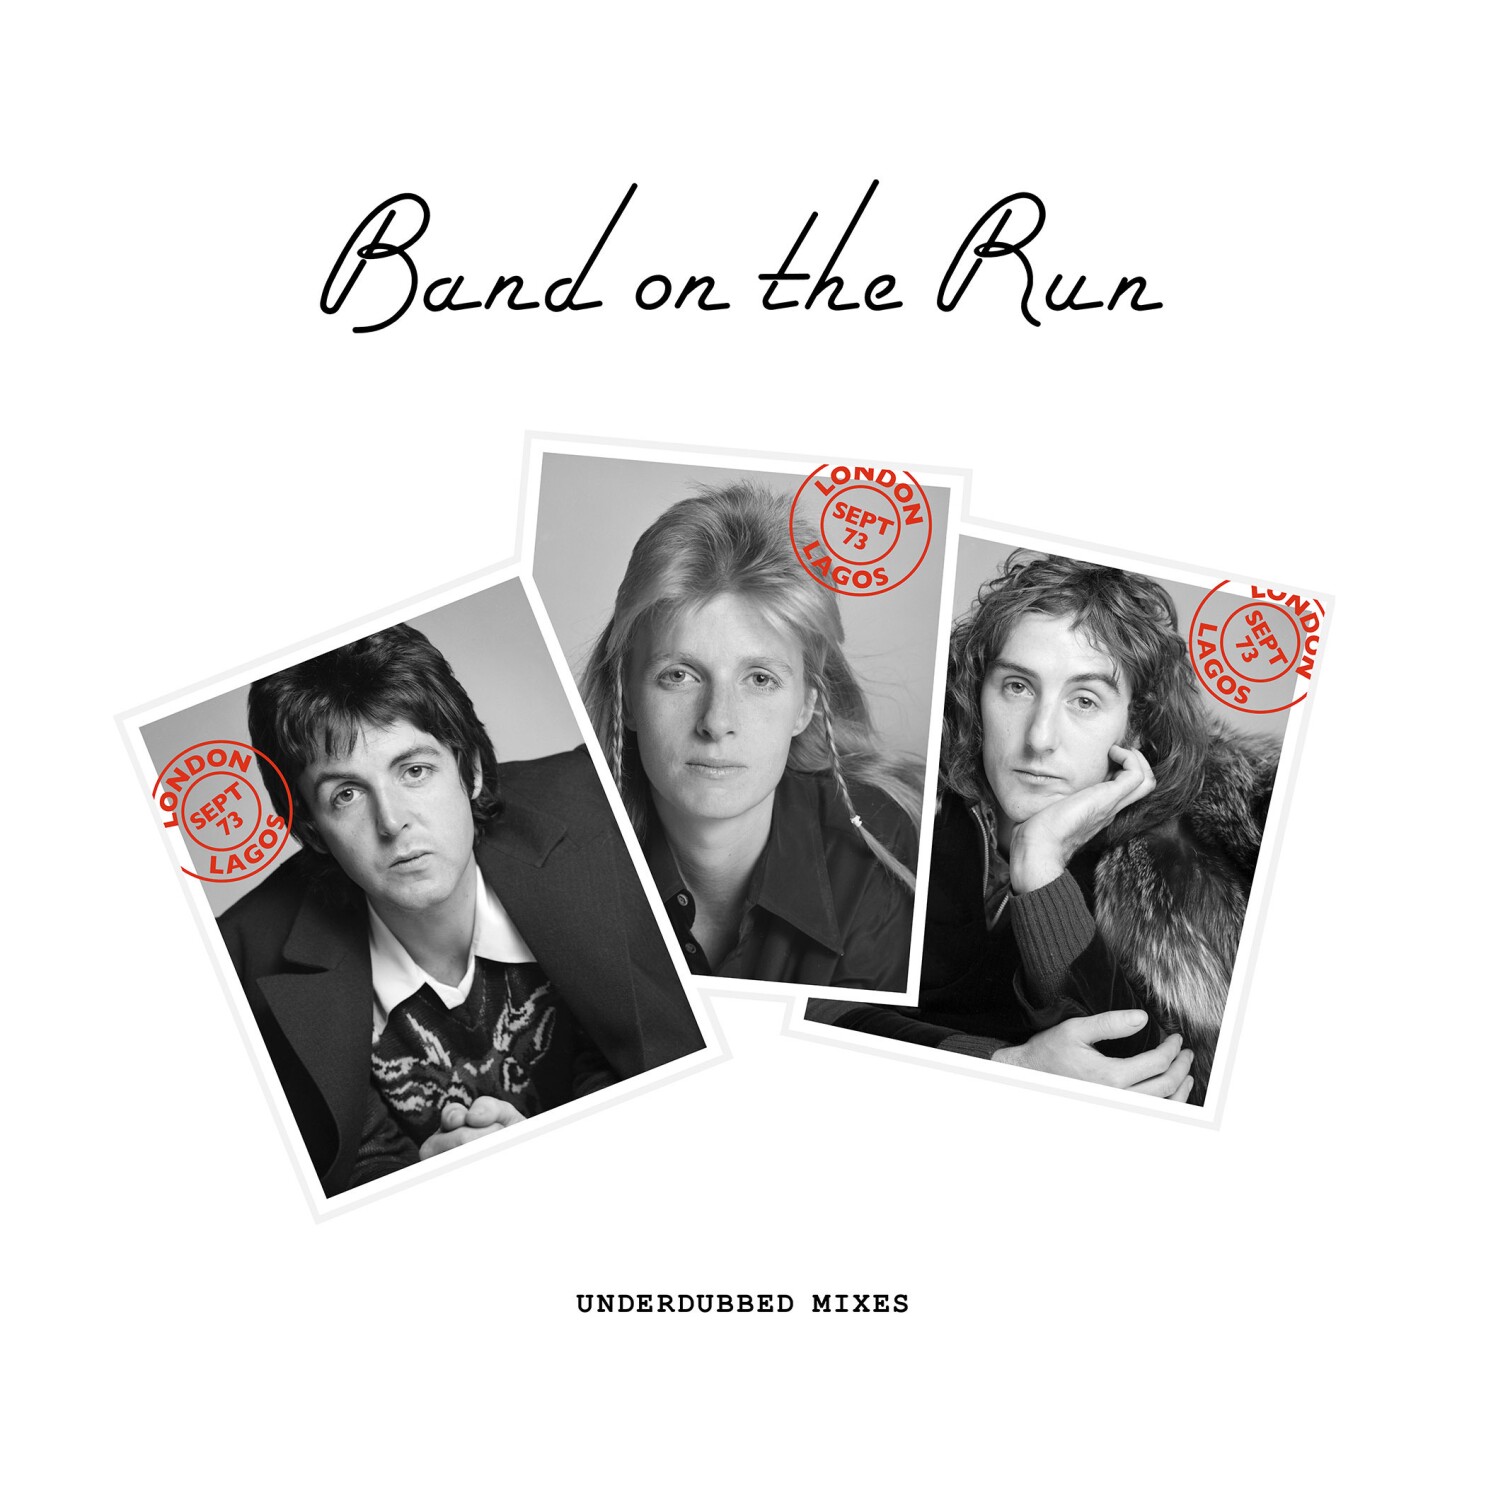 Paul McCartney and Wings rerelease 'Band on the Run' on 50th